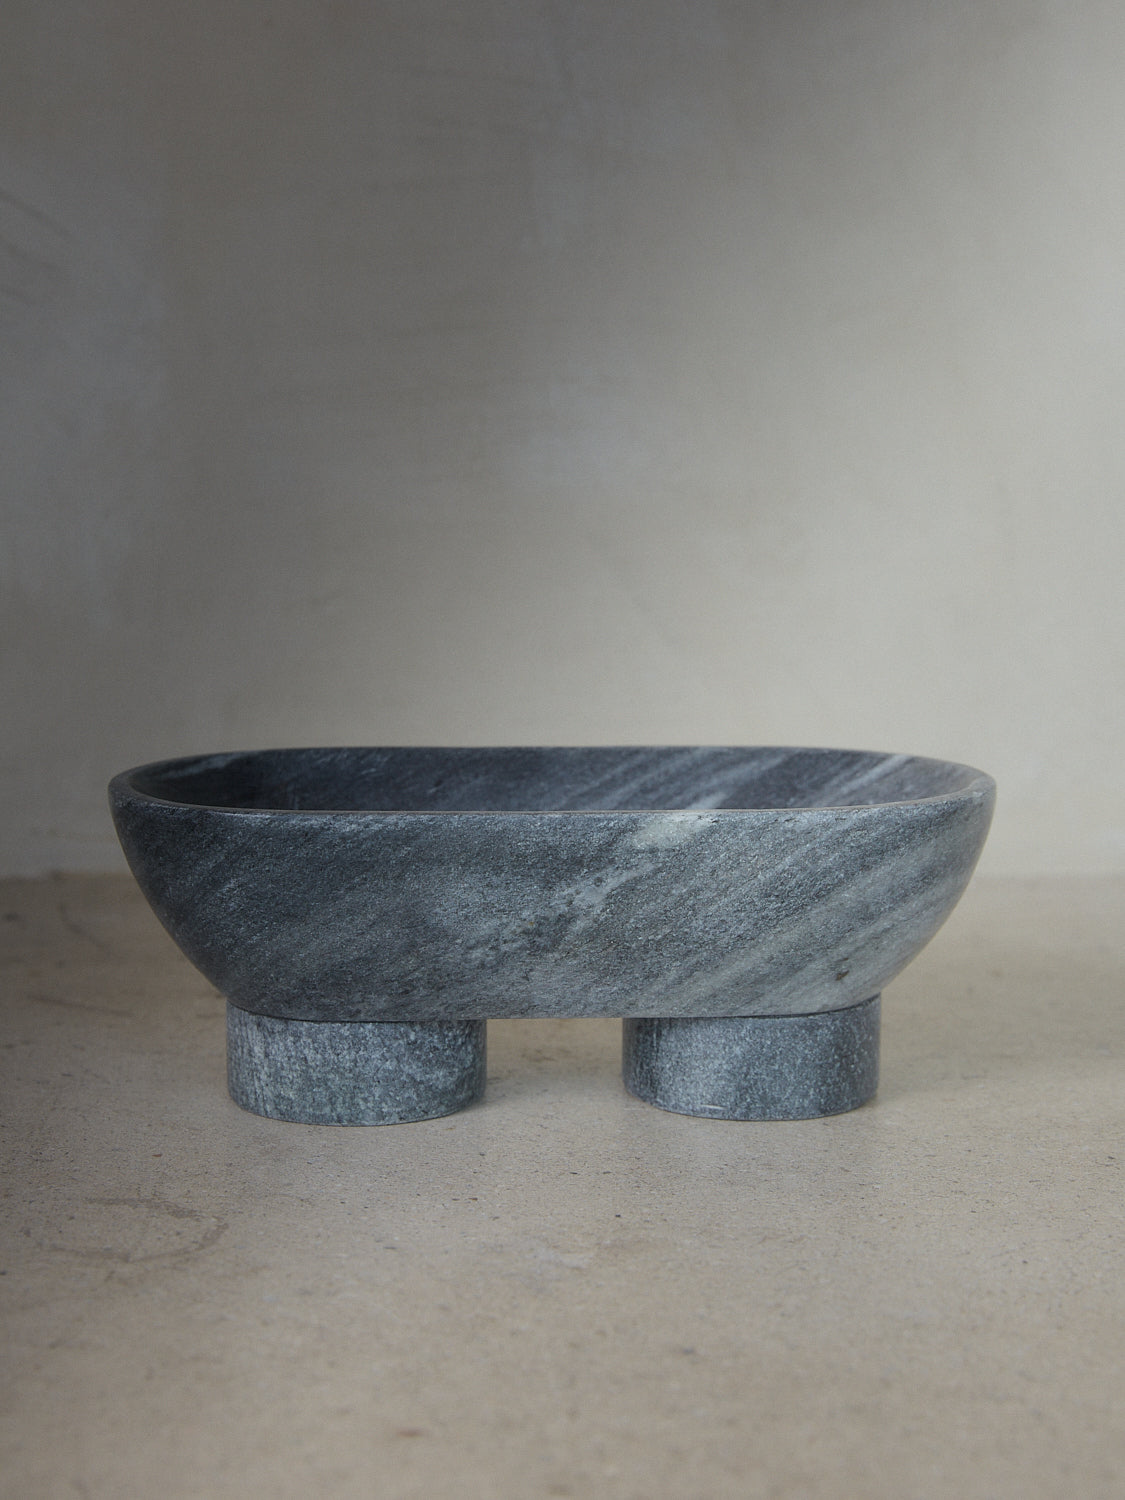 Black Alza Bowl. An oval shaped footed pedestal catch-all carved from Black Indian Selvara marble.